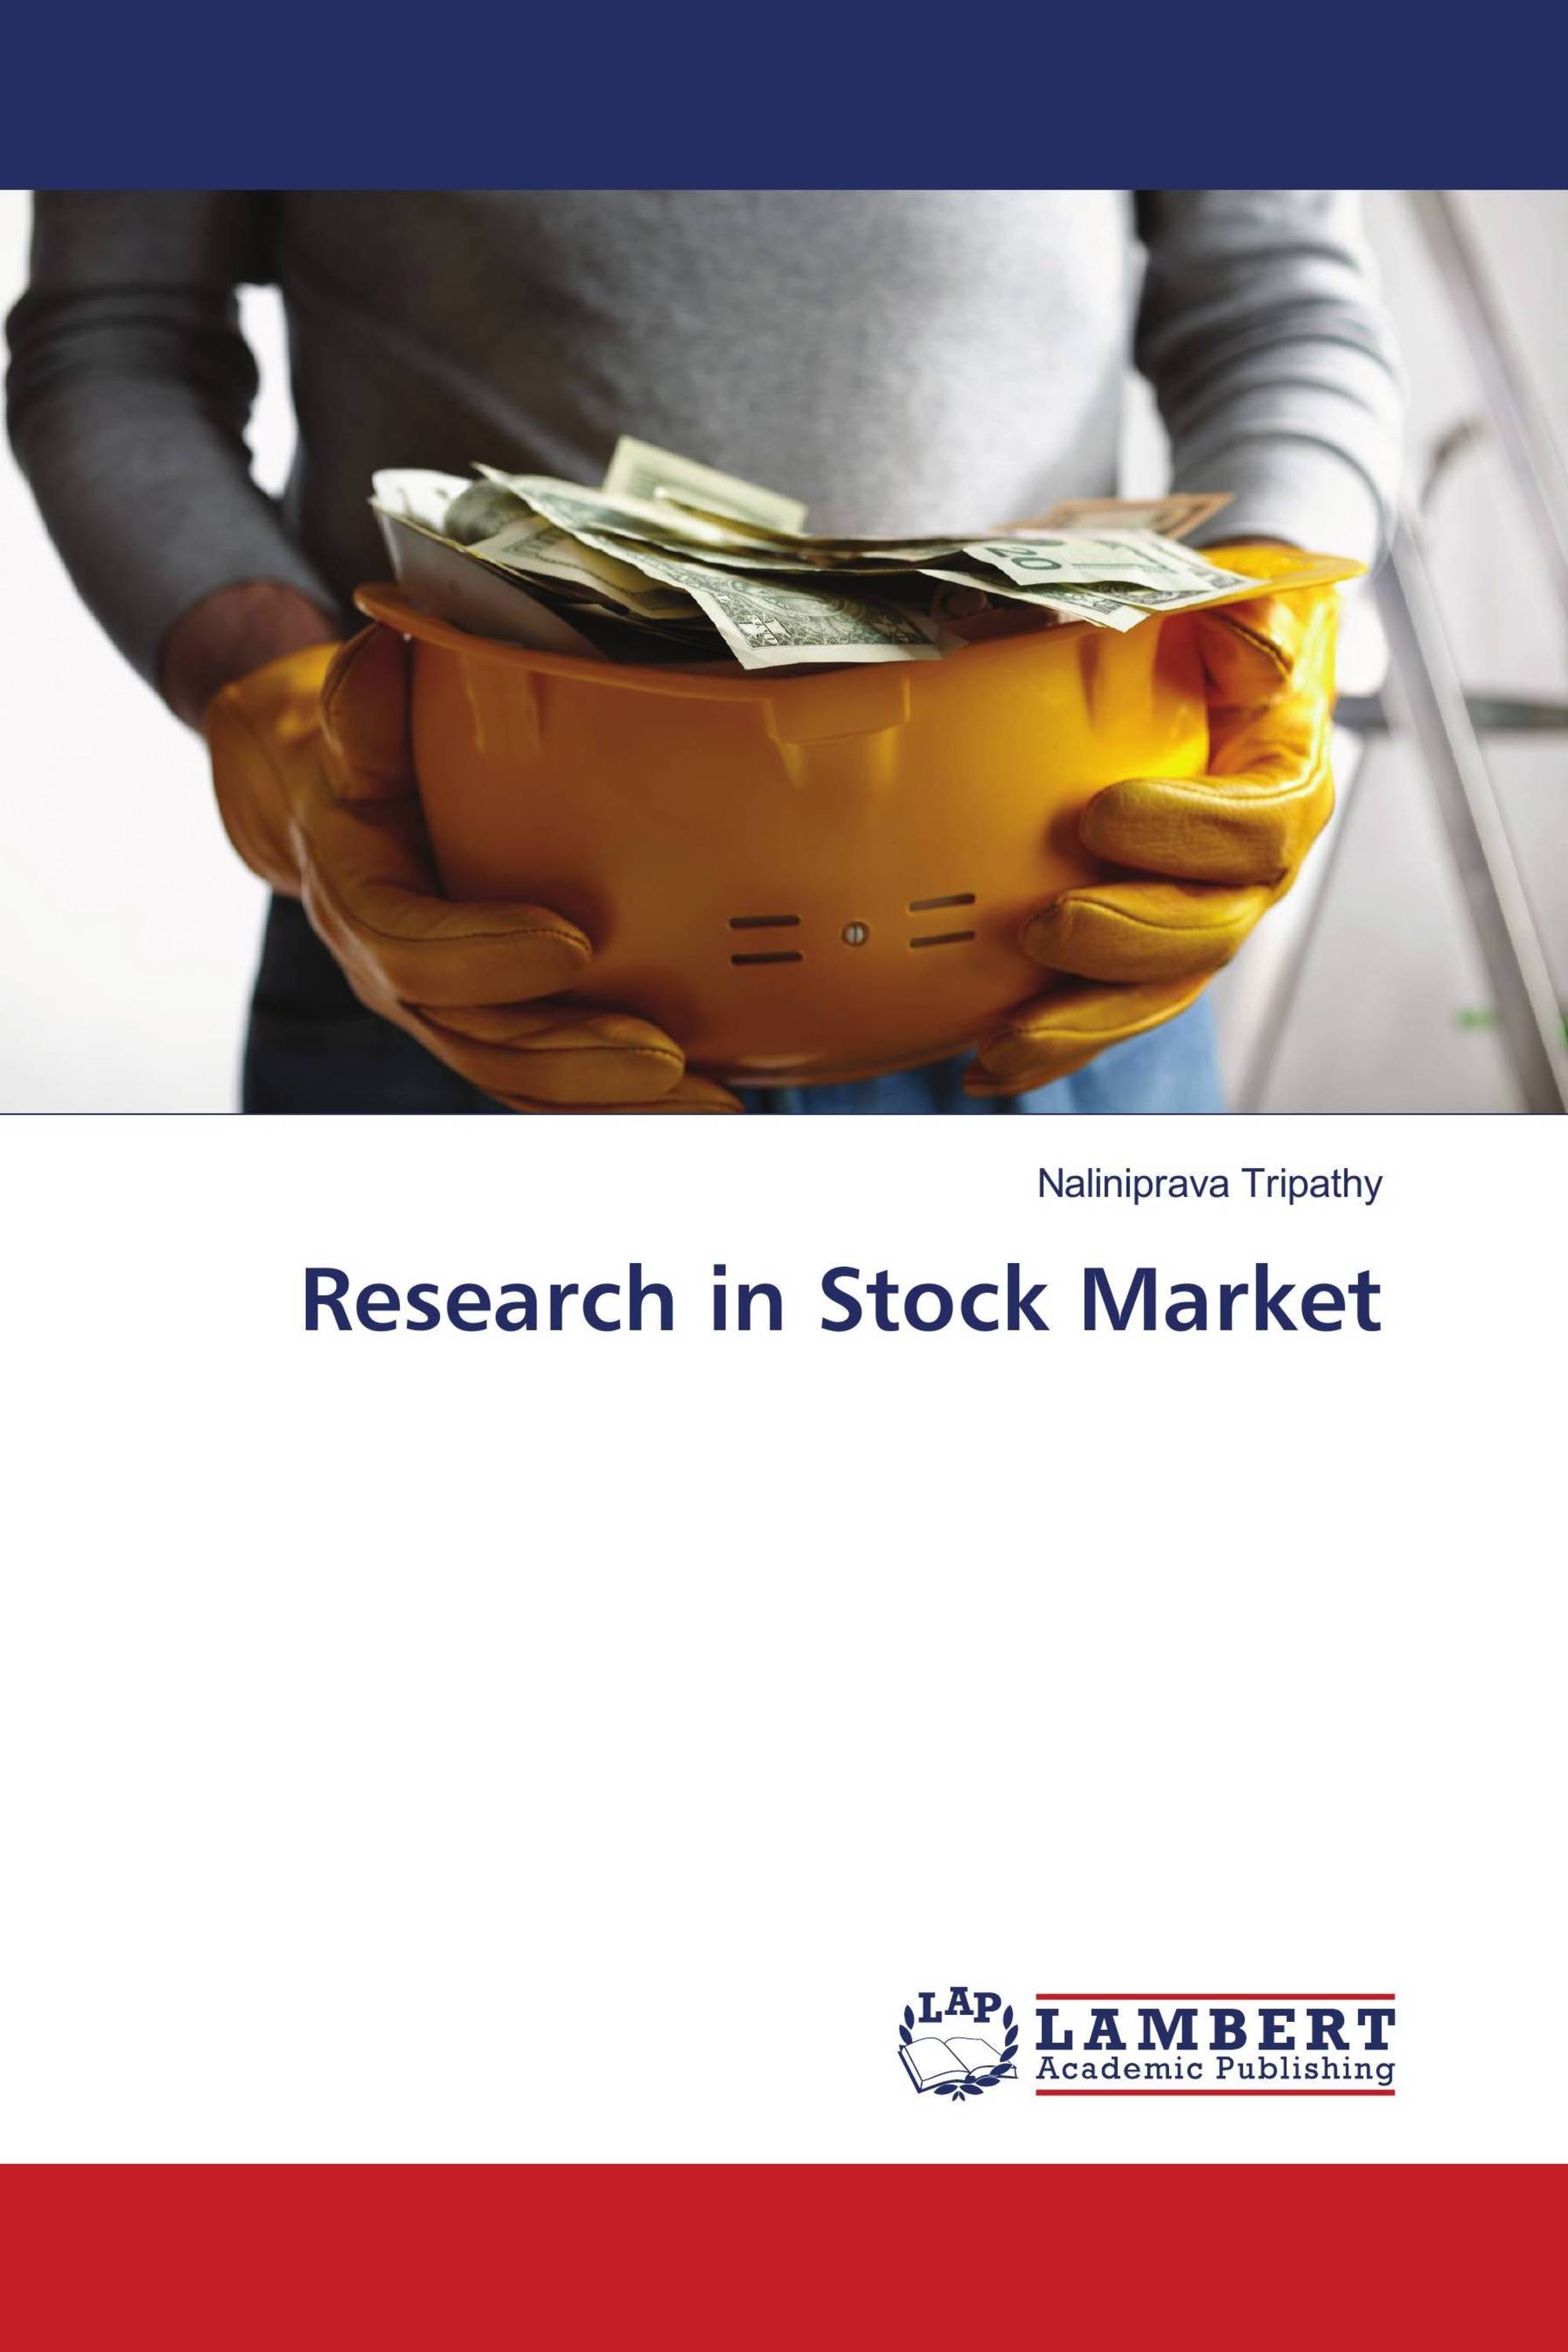 phd research topics in stock market